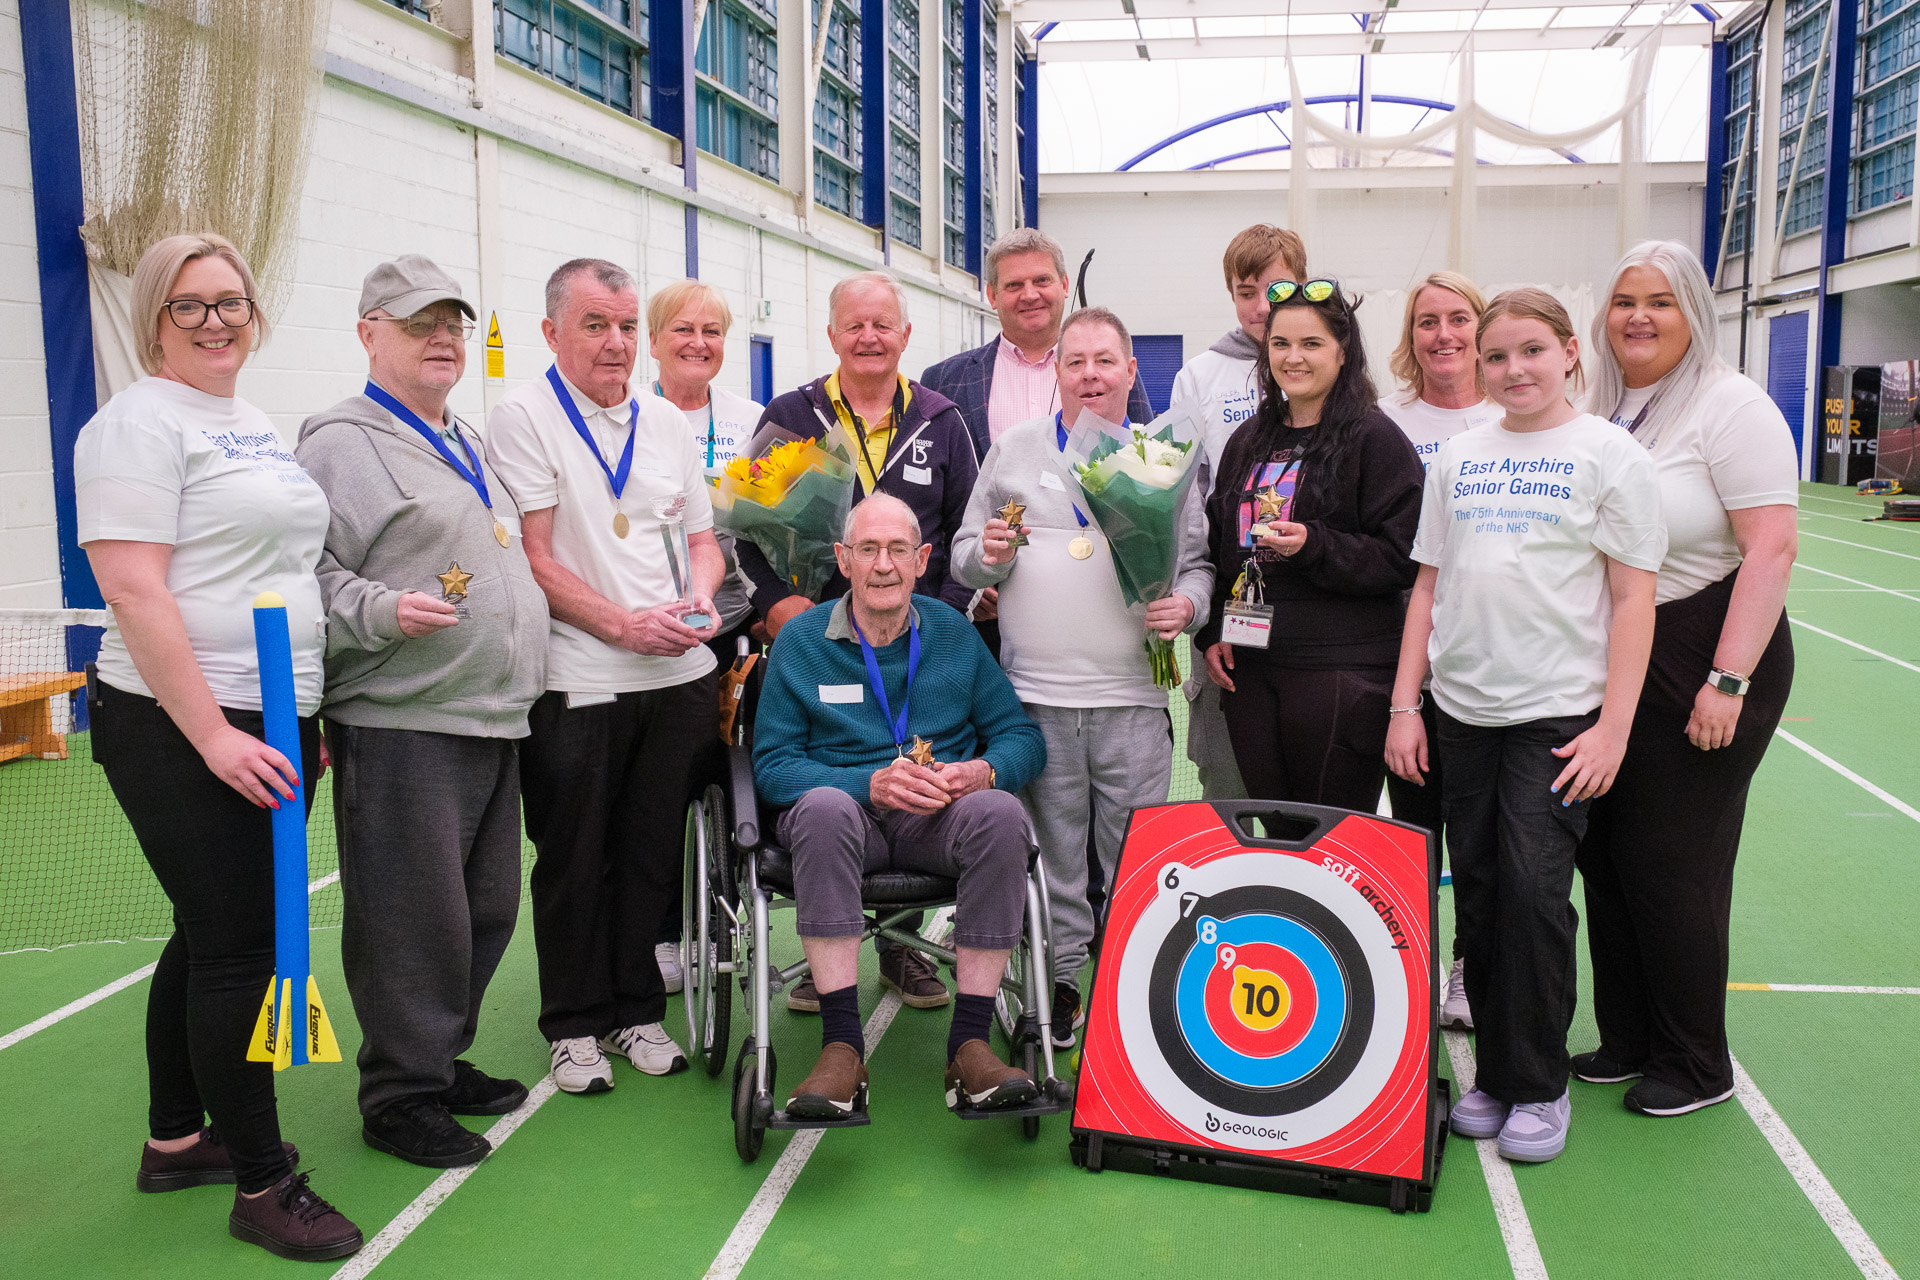 The winning team at the care home games